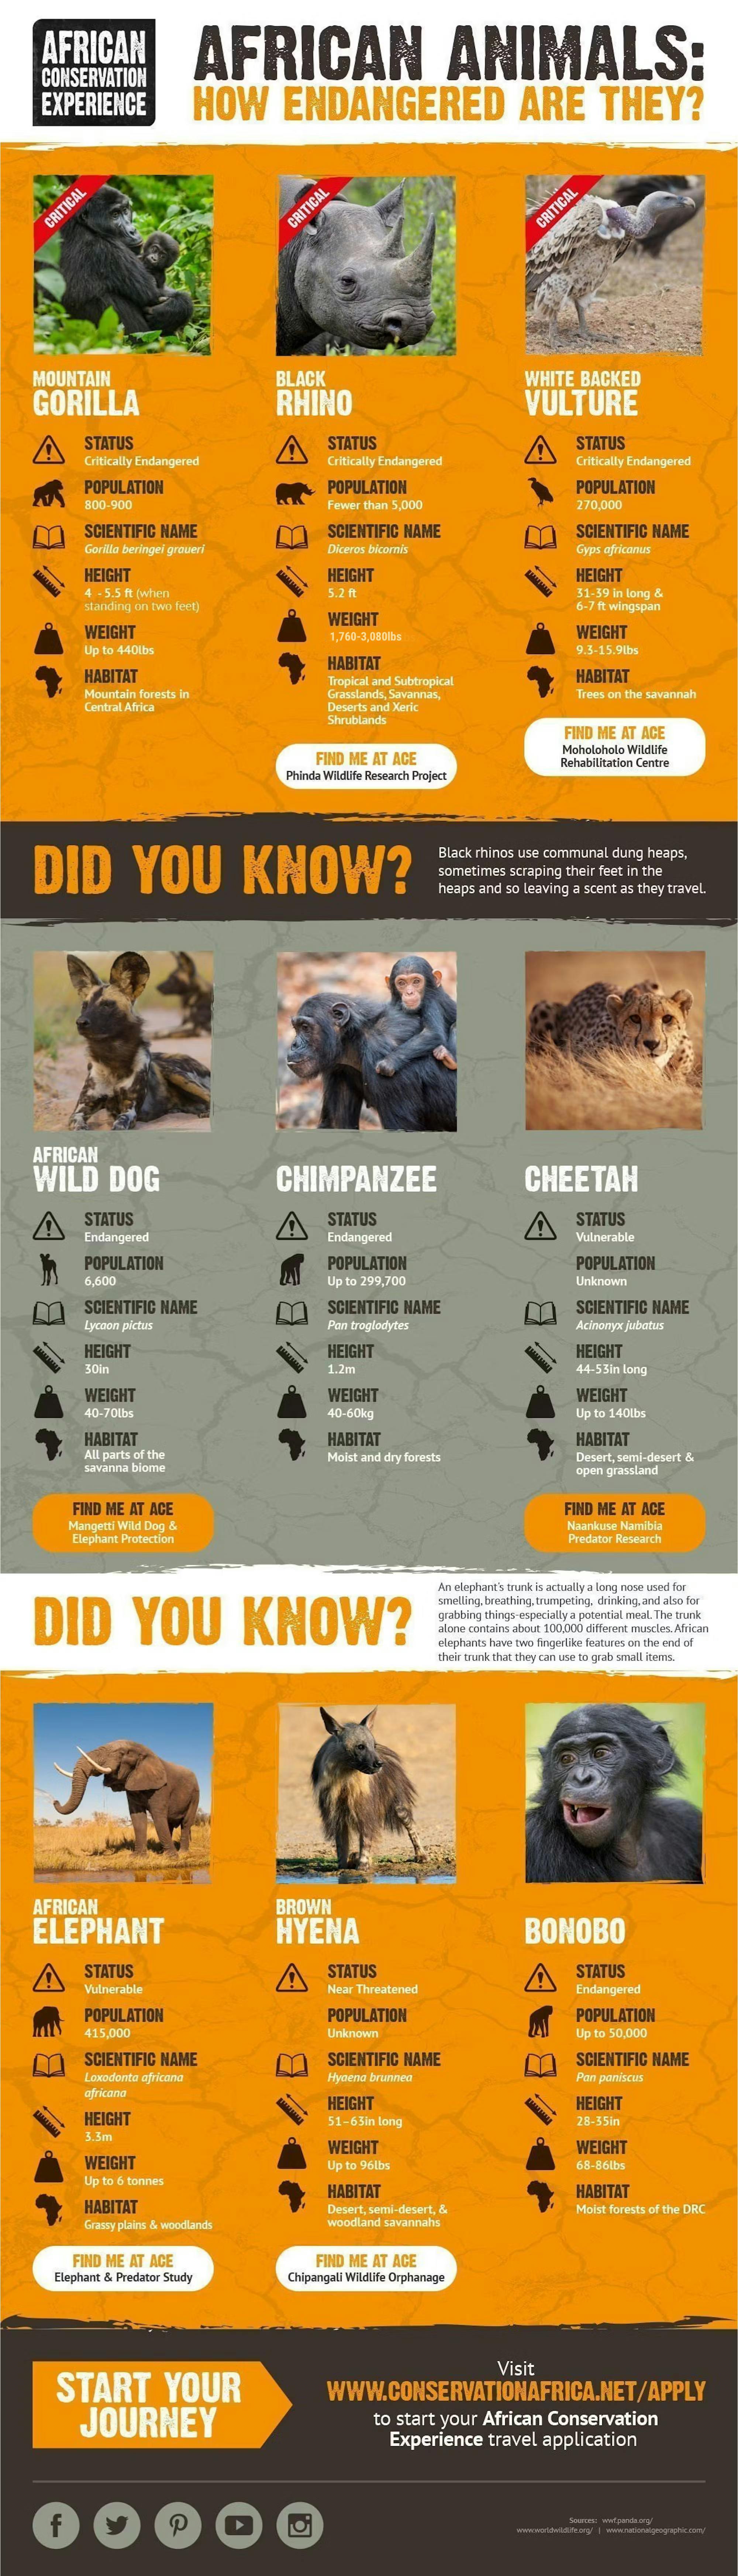 Infographic: Endangered African animals